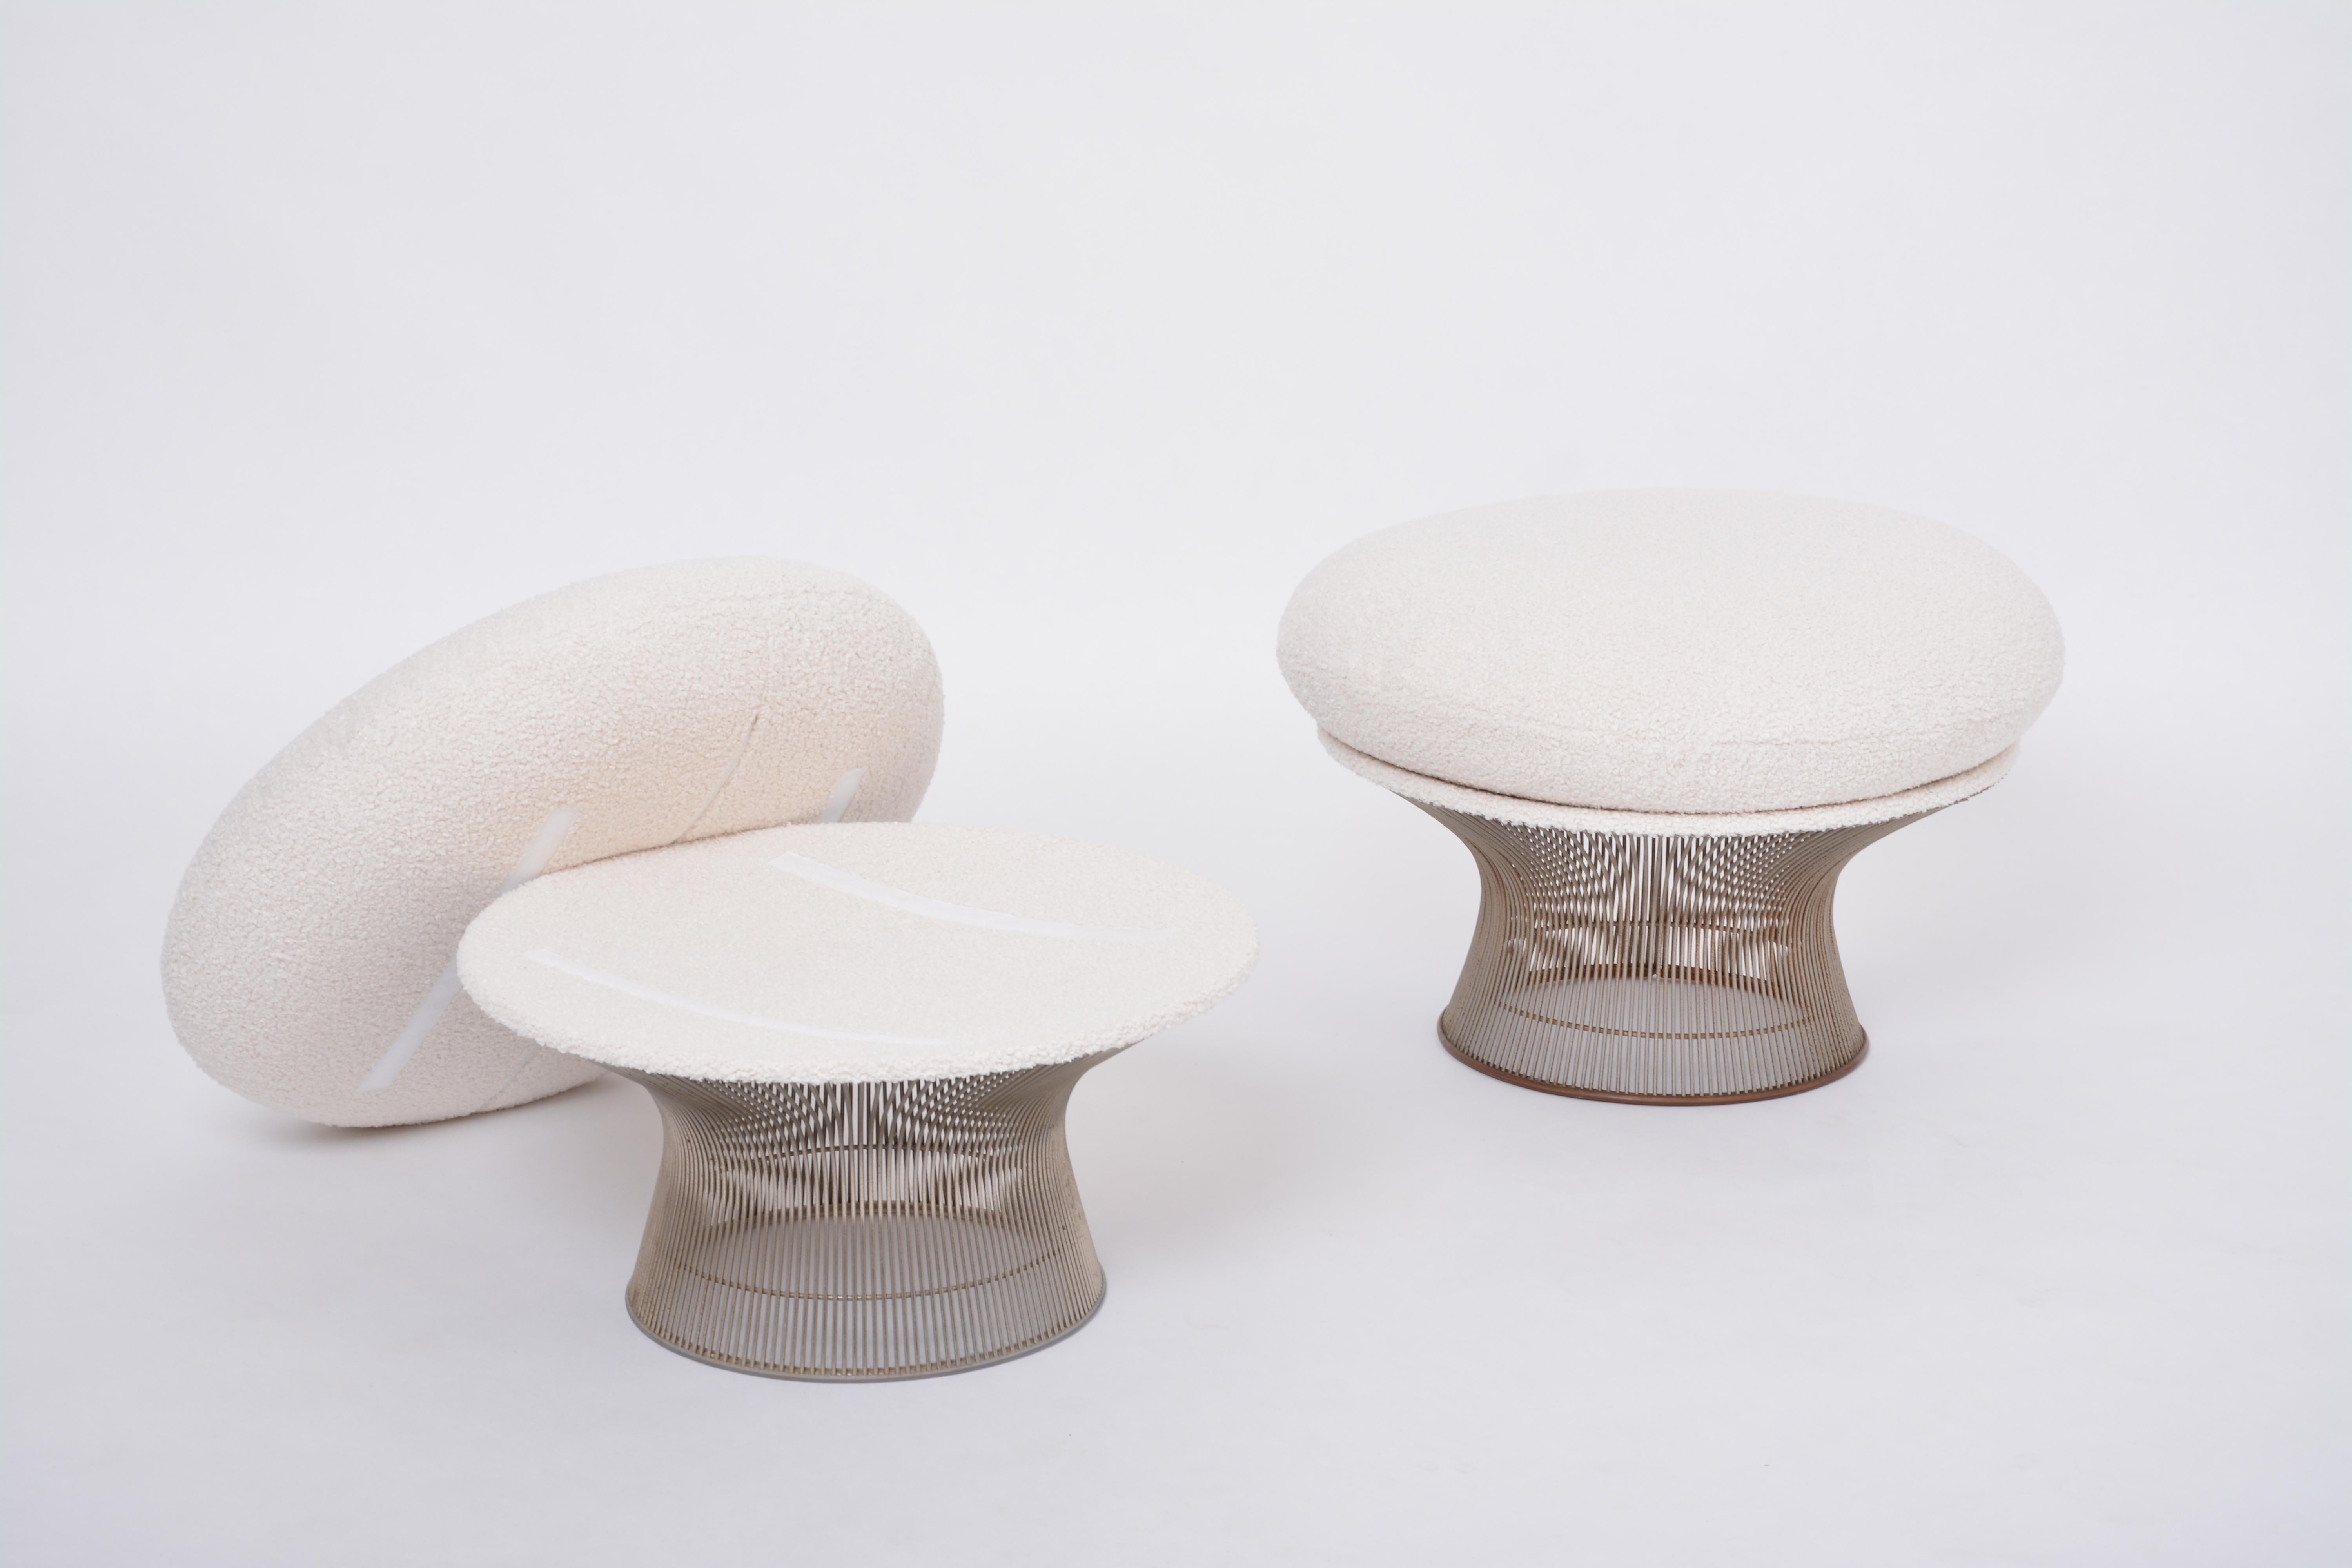 Steel Pair of reupholstered vintage Mid-century ottomans by Warren Platner for Knoll